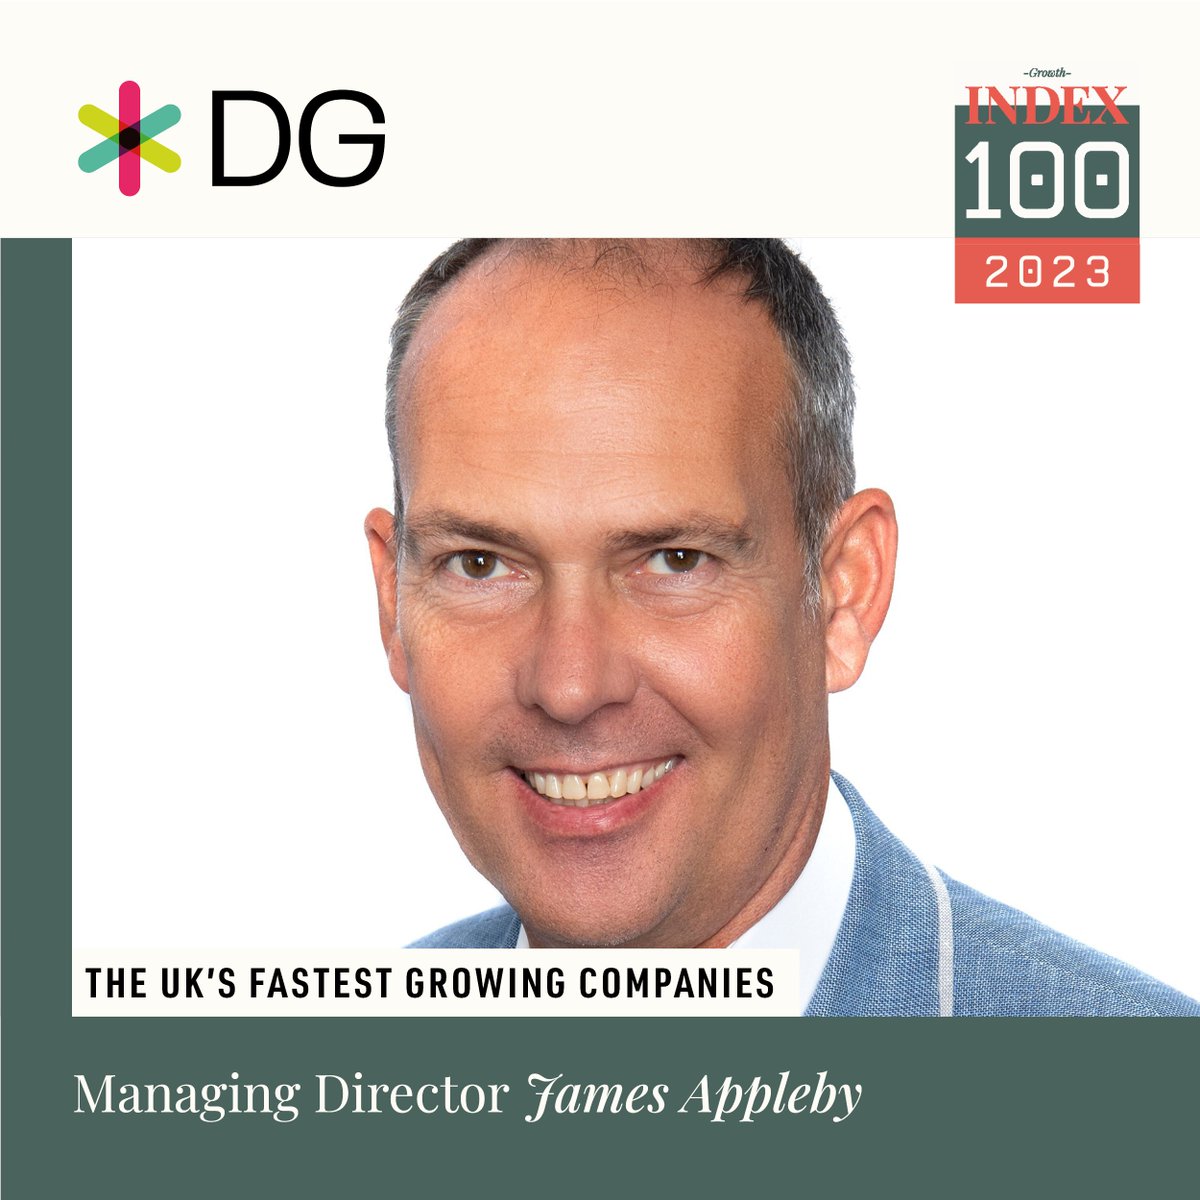 Curious about how @DG International plans to become a billion-pound business? Discover their journey and growth strategy in our interview with James Appleby, Managing Director : eu1.hubs.ly/H052ph80